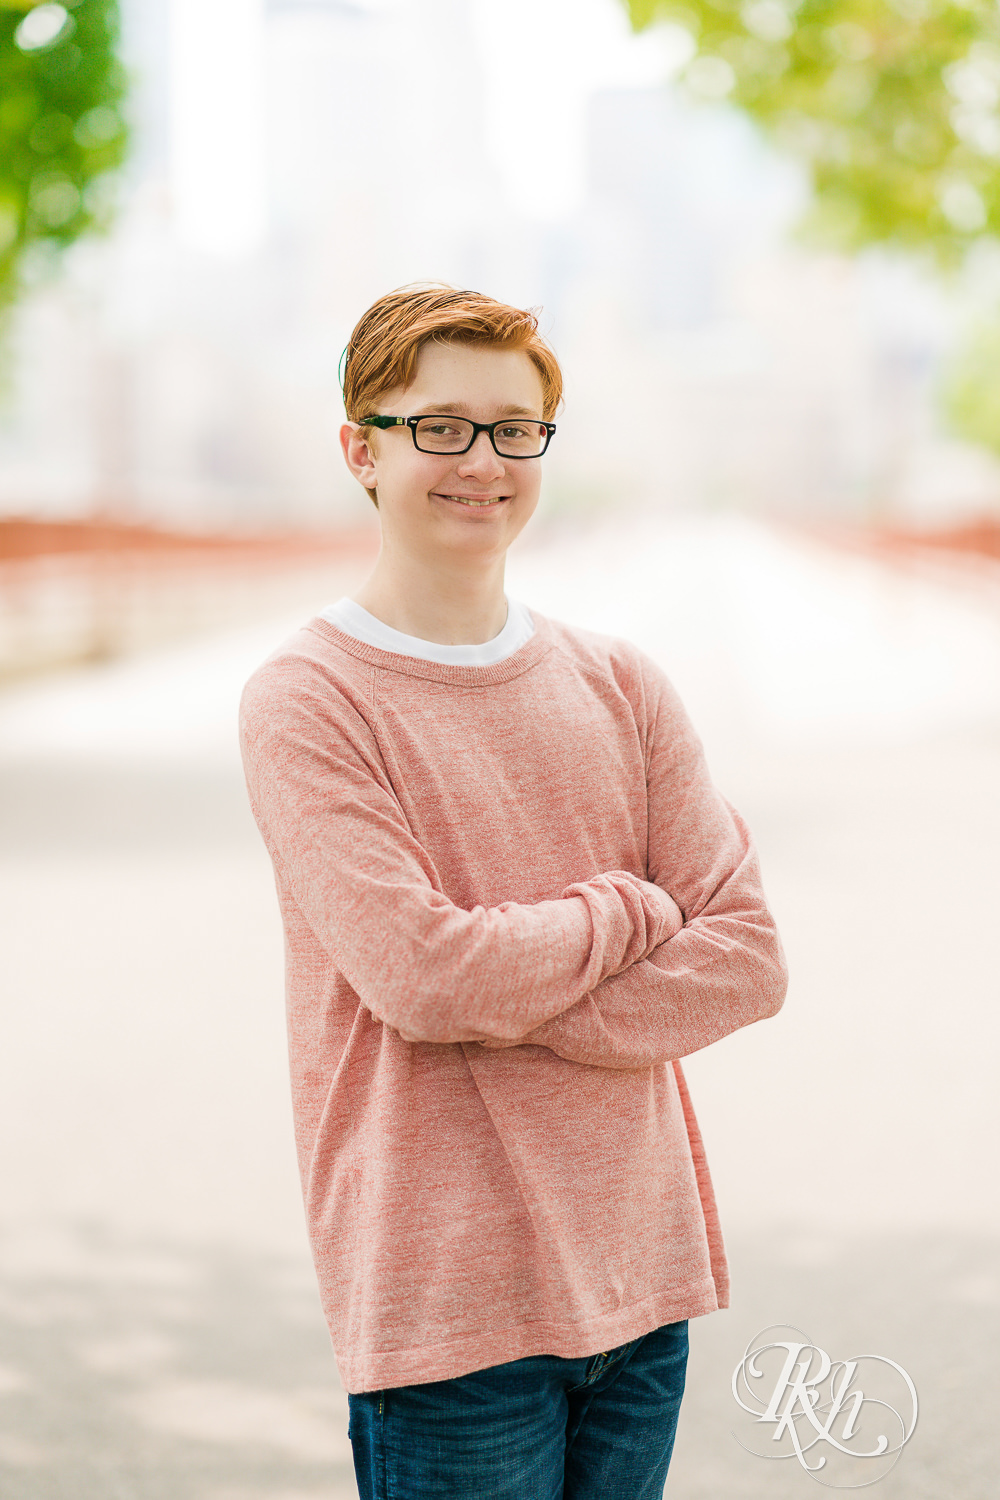 Redheaded boy in glasses and sweater looks at camera for senior pictures in Minneapolis.